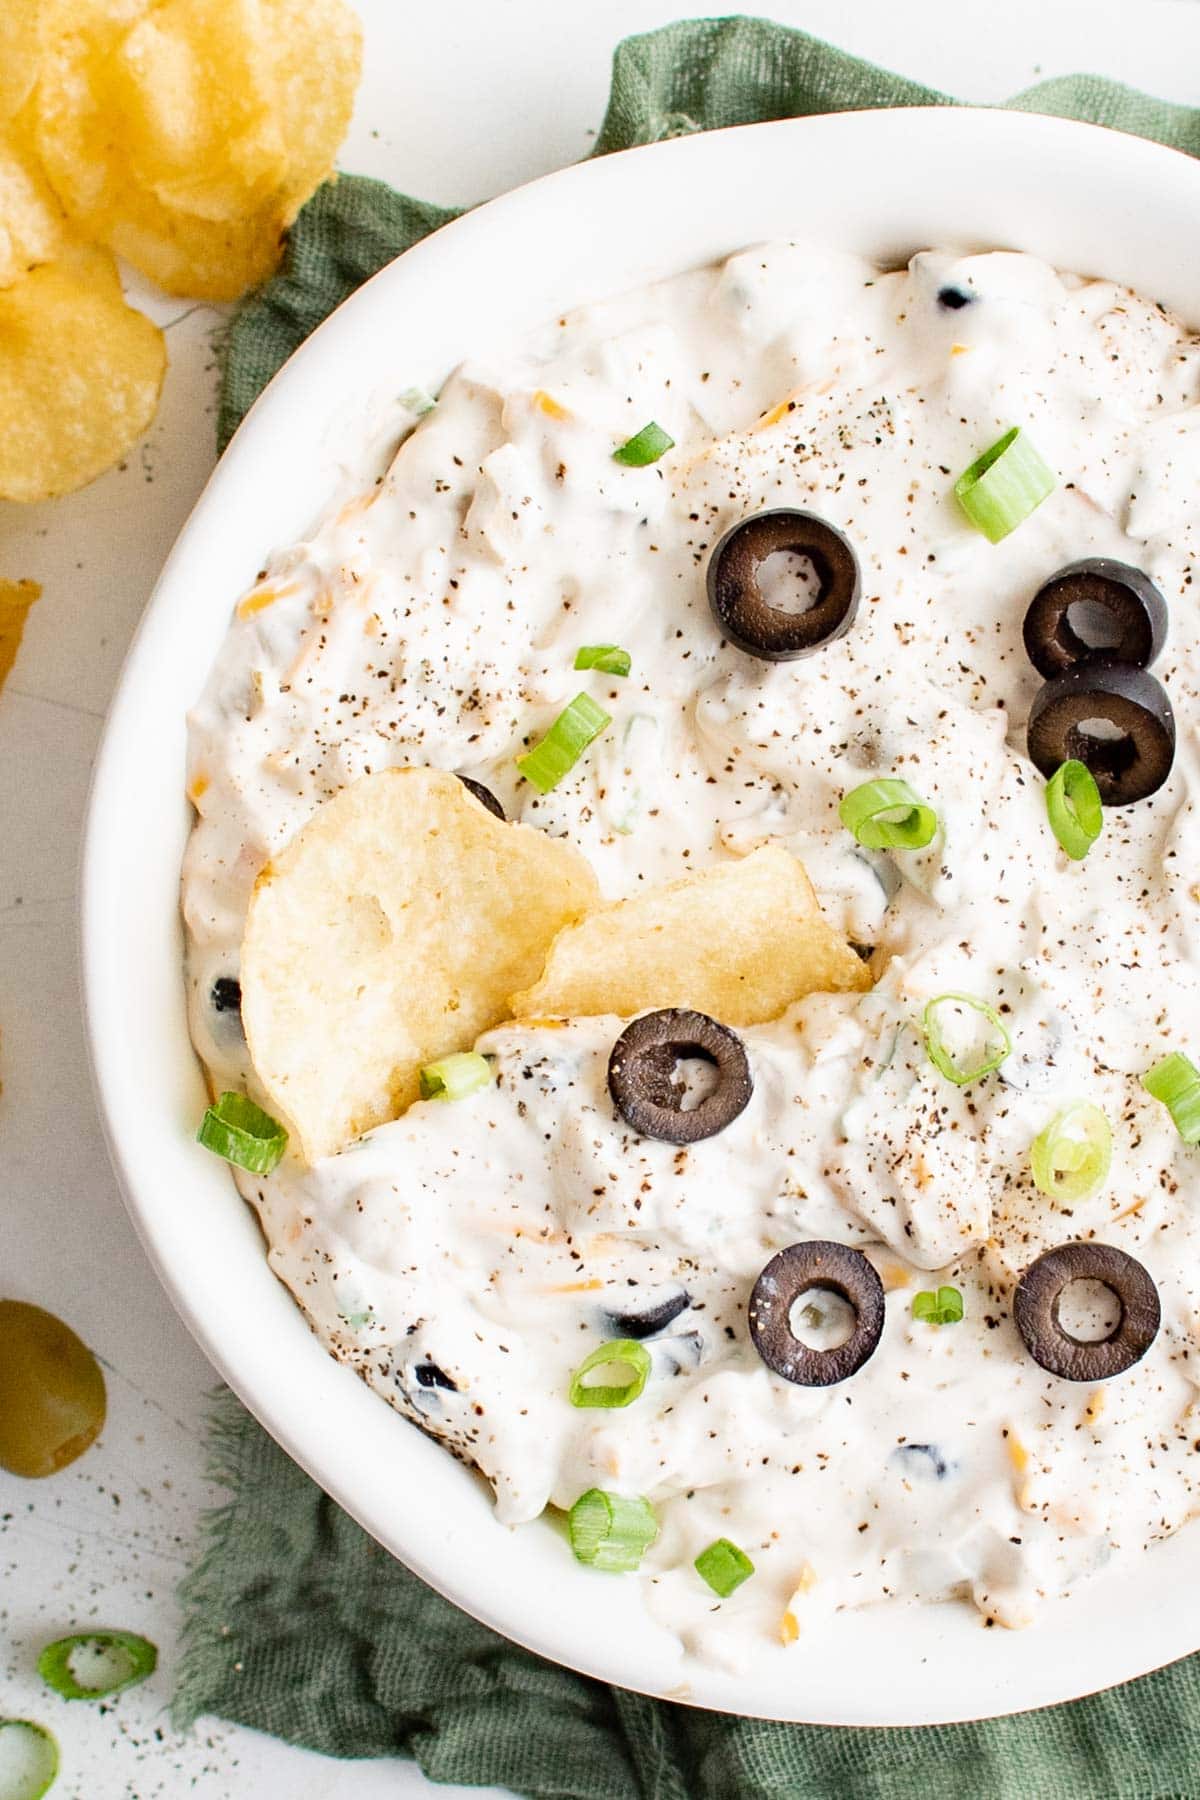 Creamy white dip with olives, green onions and black pepper garnish. Potato chips.